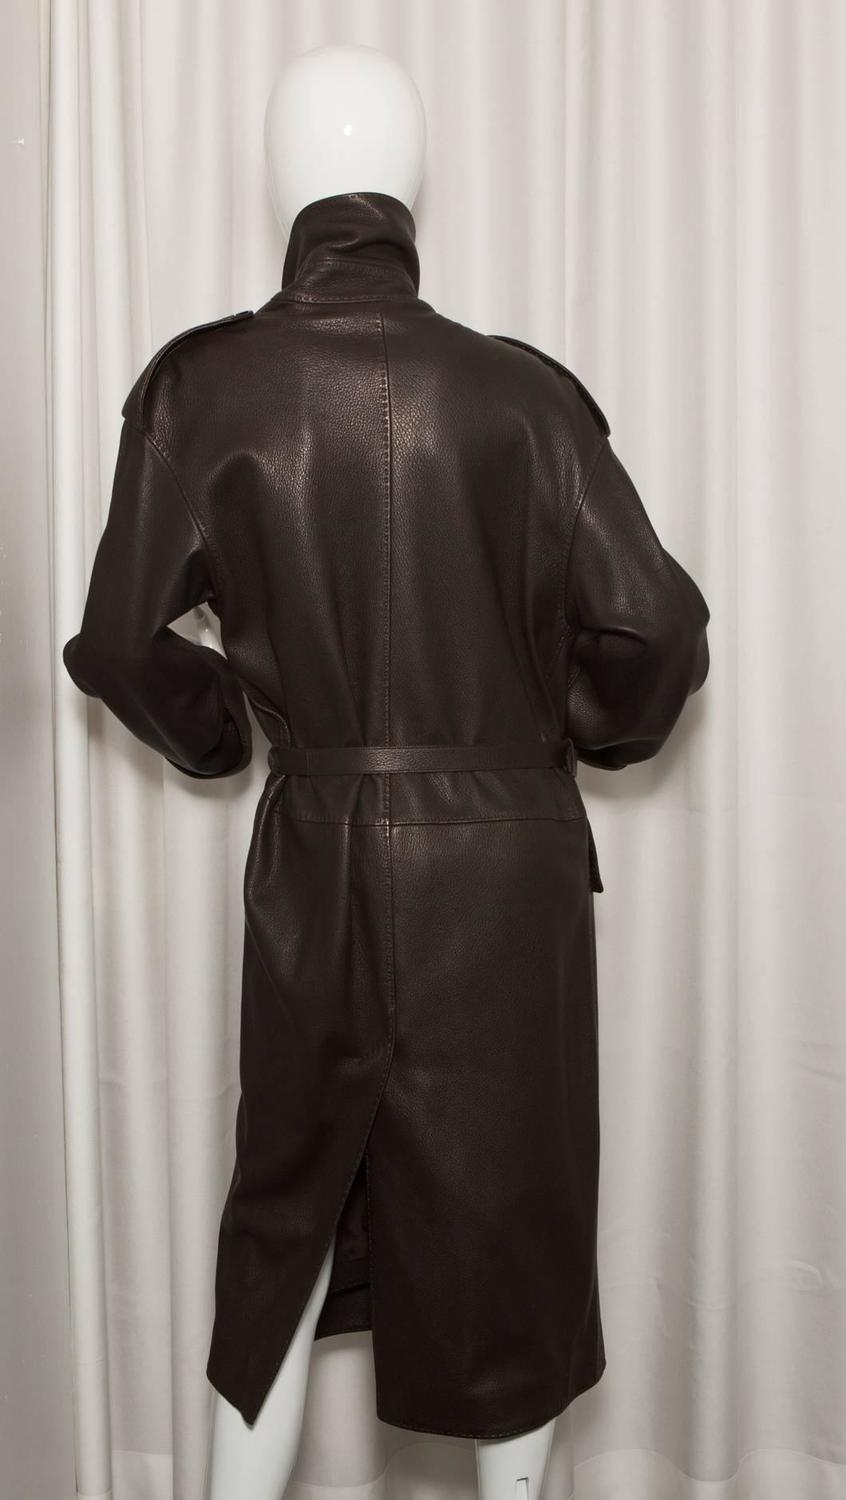 Hermes Dark Brown Leather Trench Coat For Sale at 1stdibs